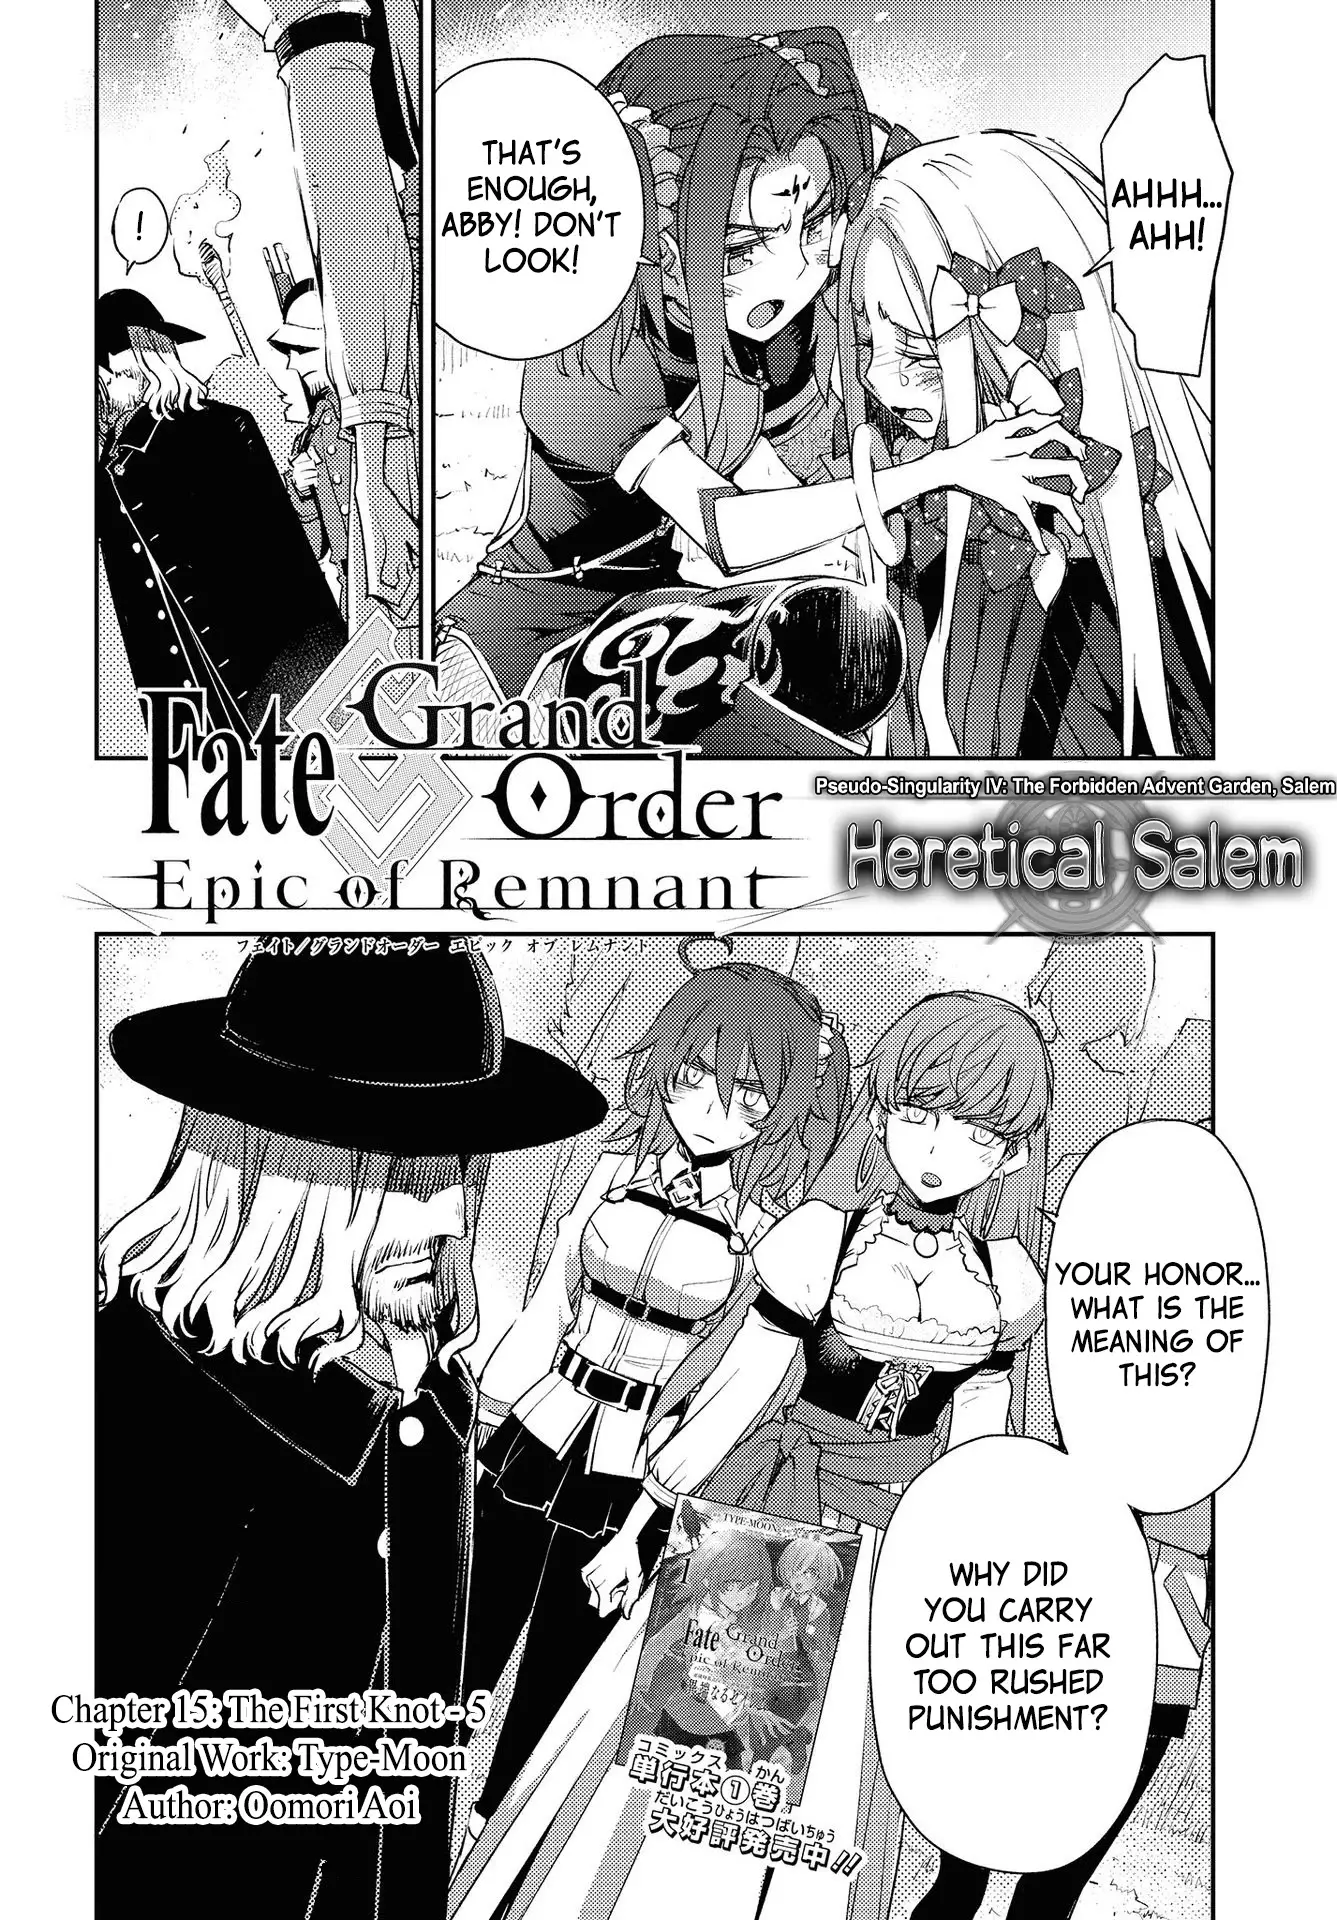 Fate/grand Order: Epic Of Remnant - Subspecies Singularity Iv: Taboo Advent Salem: Salem Of Heresy - 15 page 2